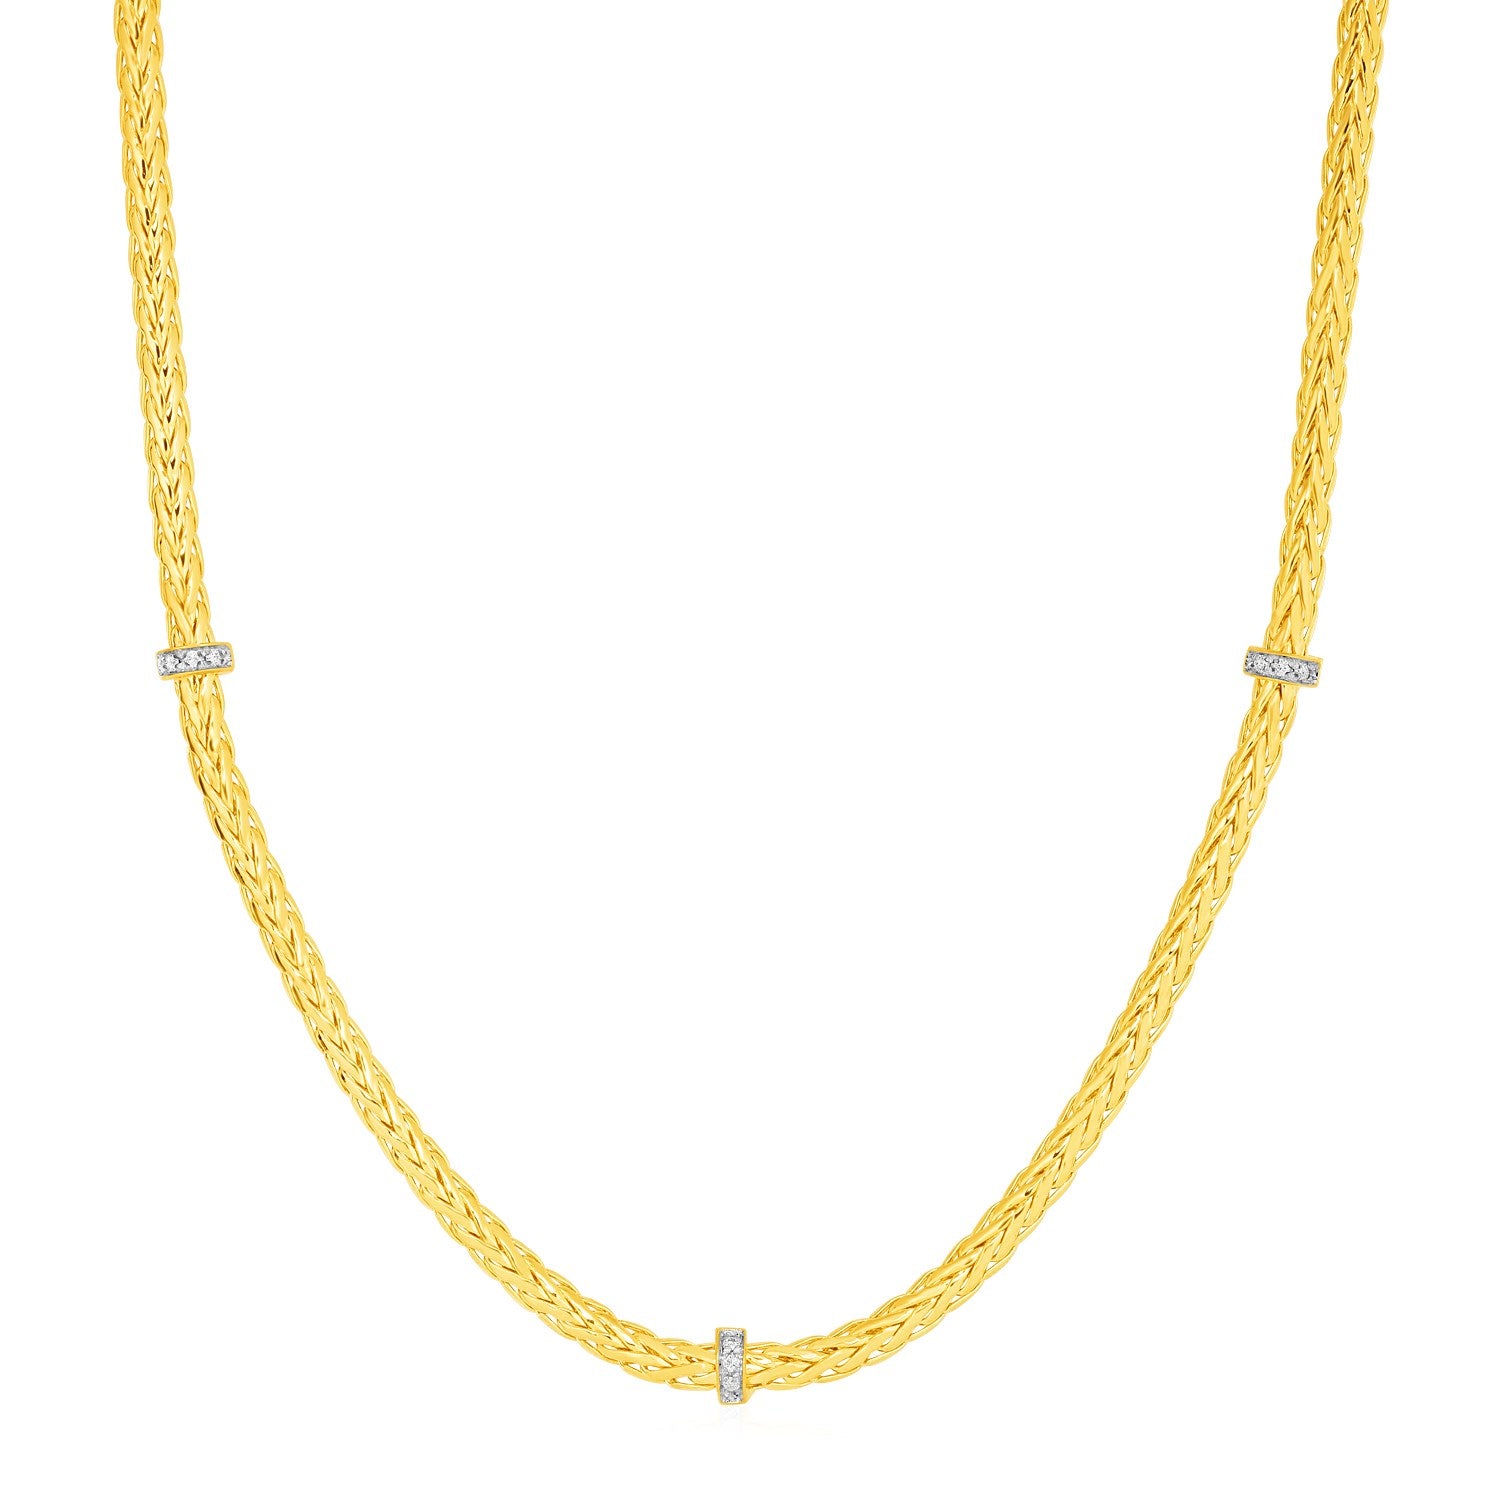 Woven Rope Necklace With Diamond Accents In 14K Yellow Gold 93686-1